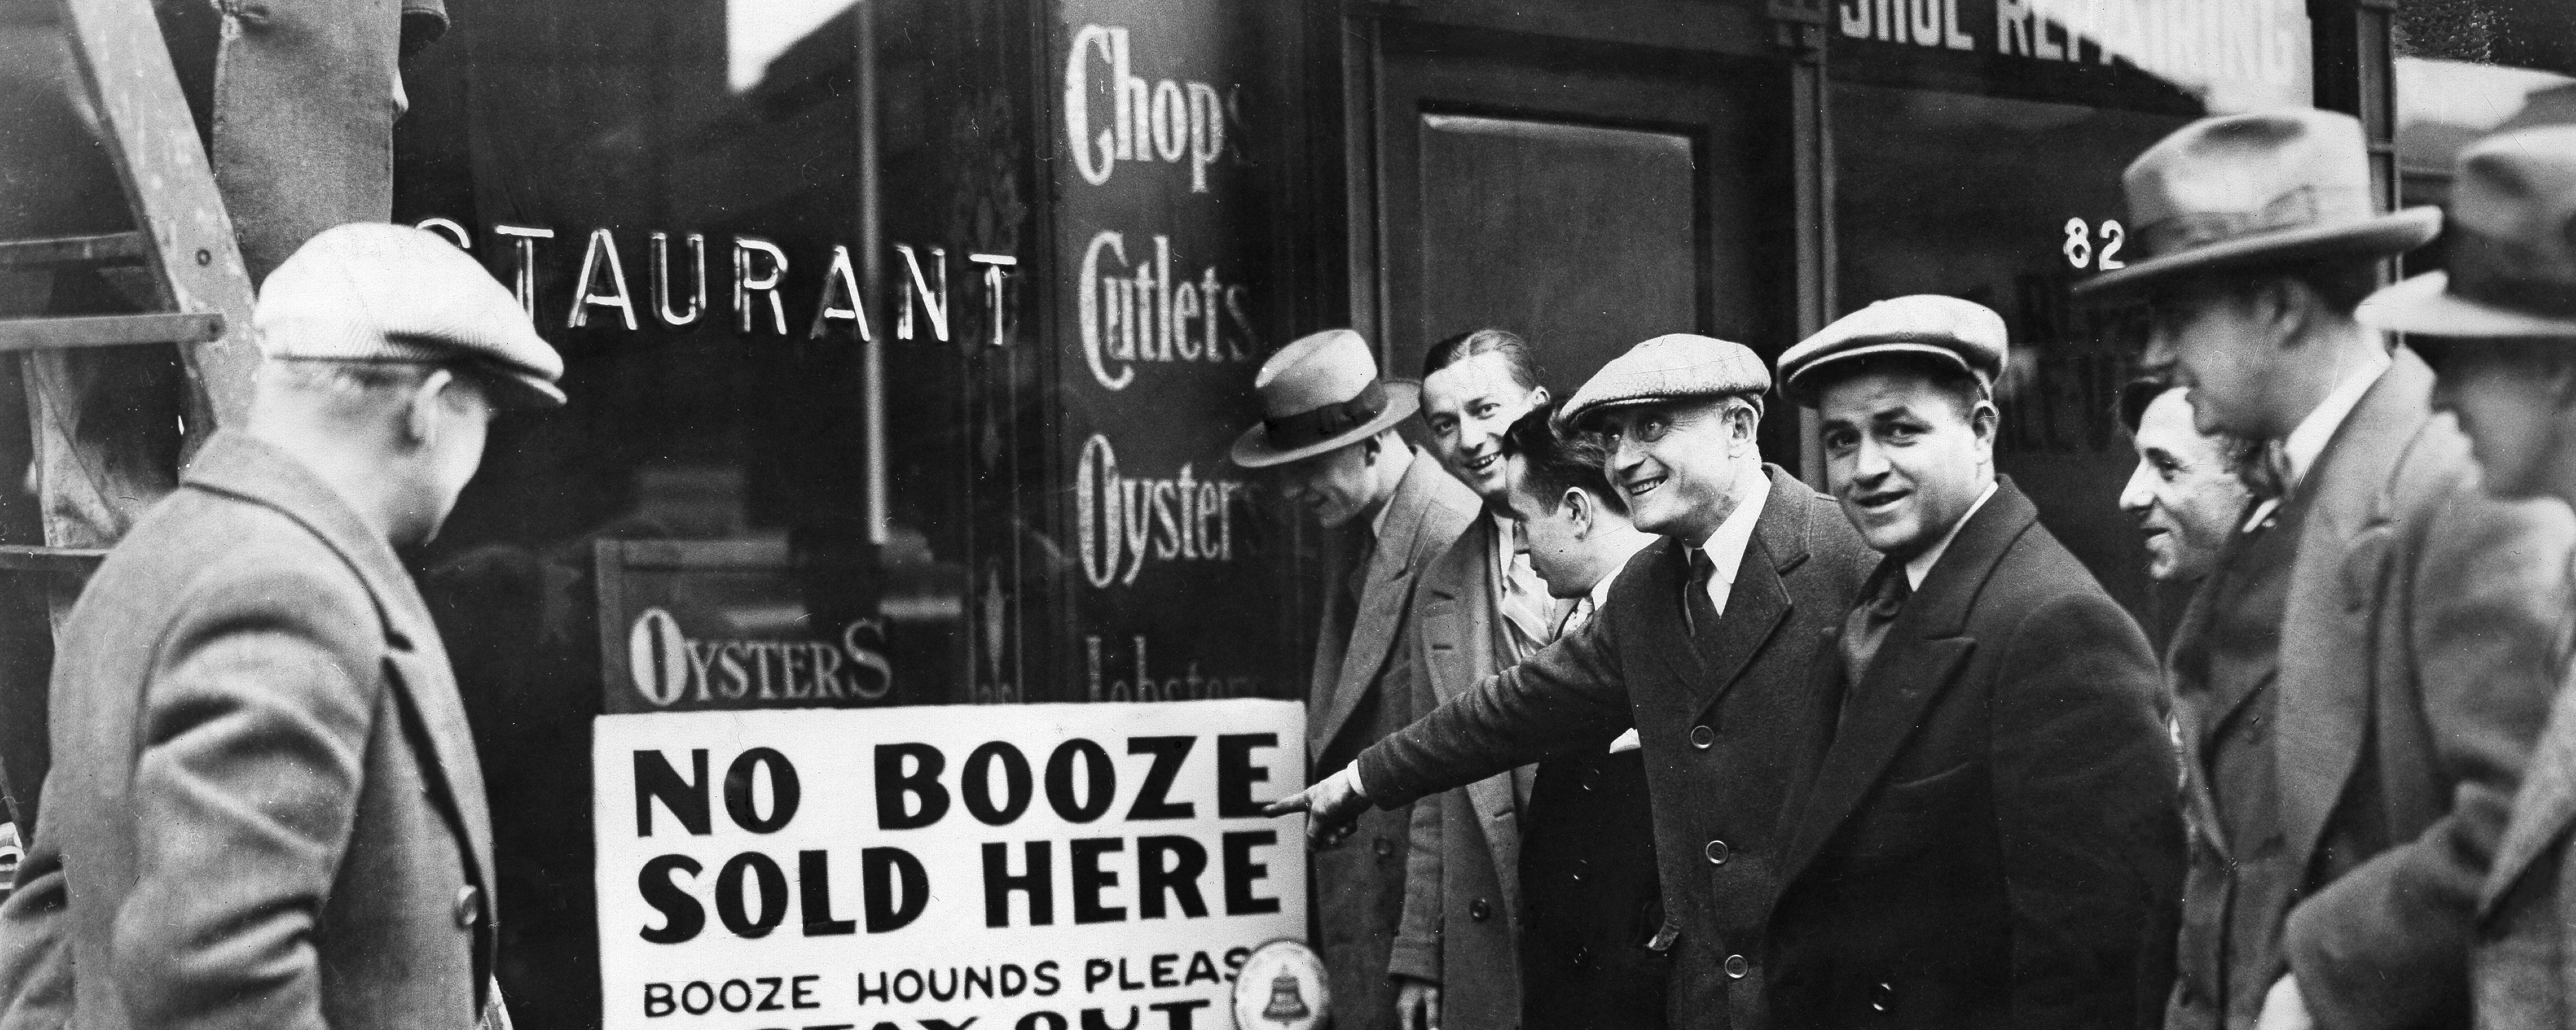 Prohibition Was America's First War on Drugs